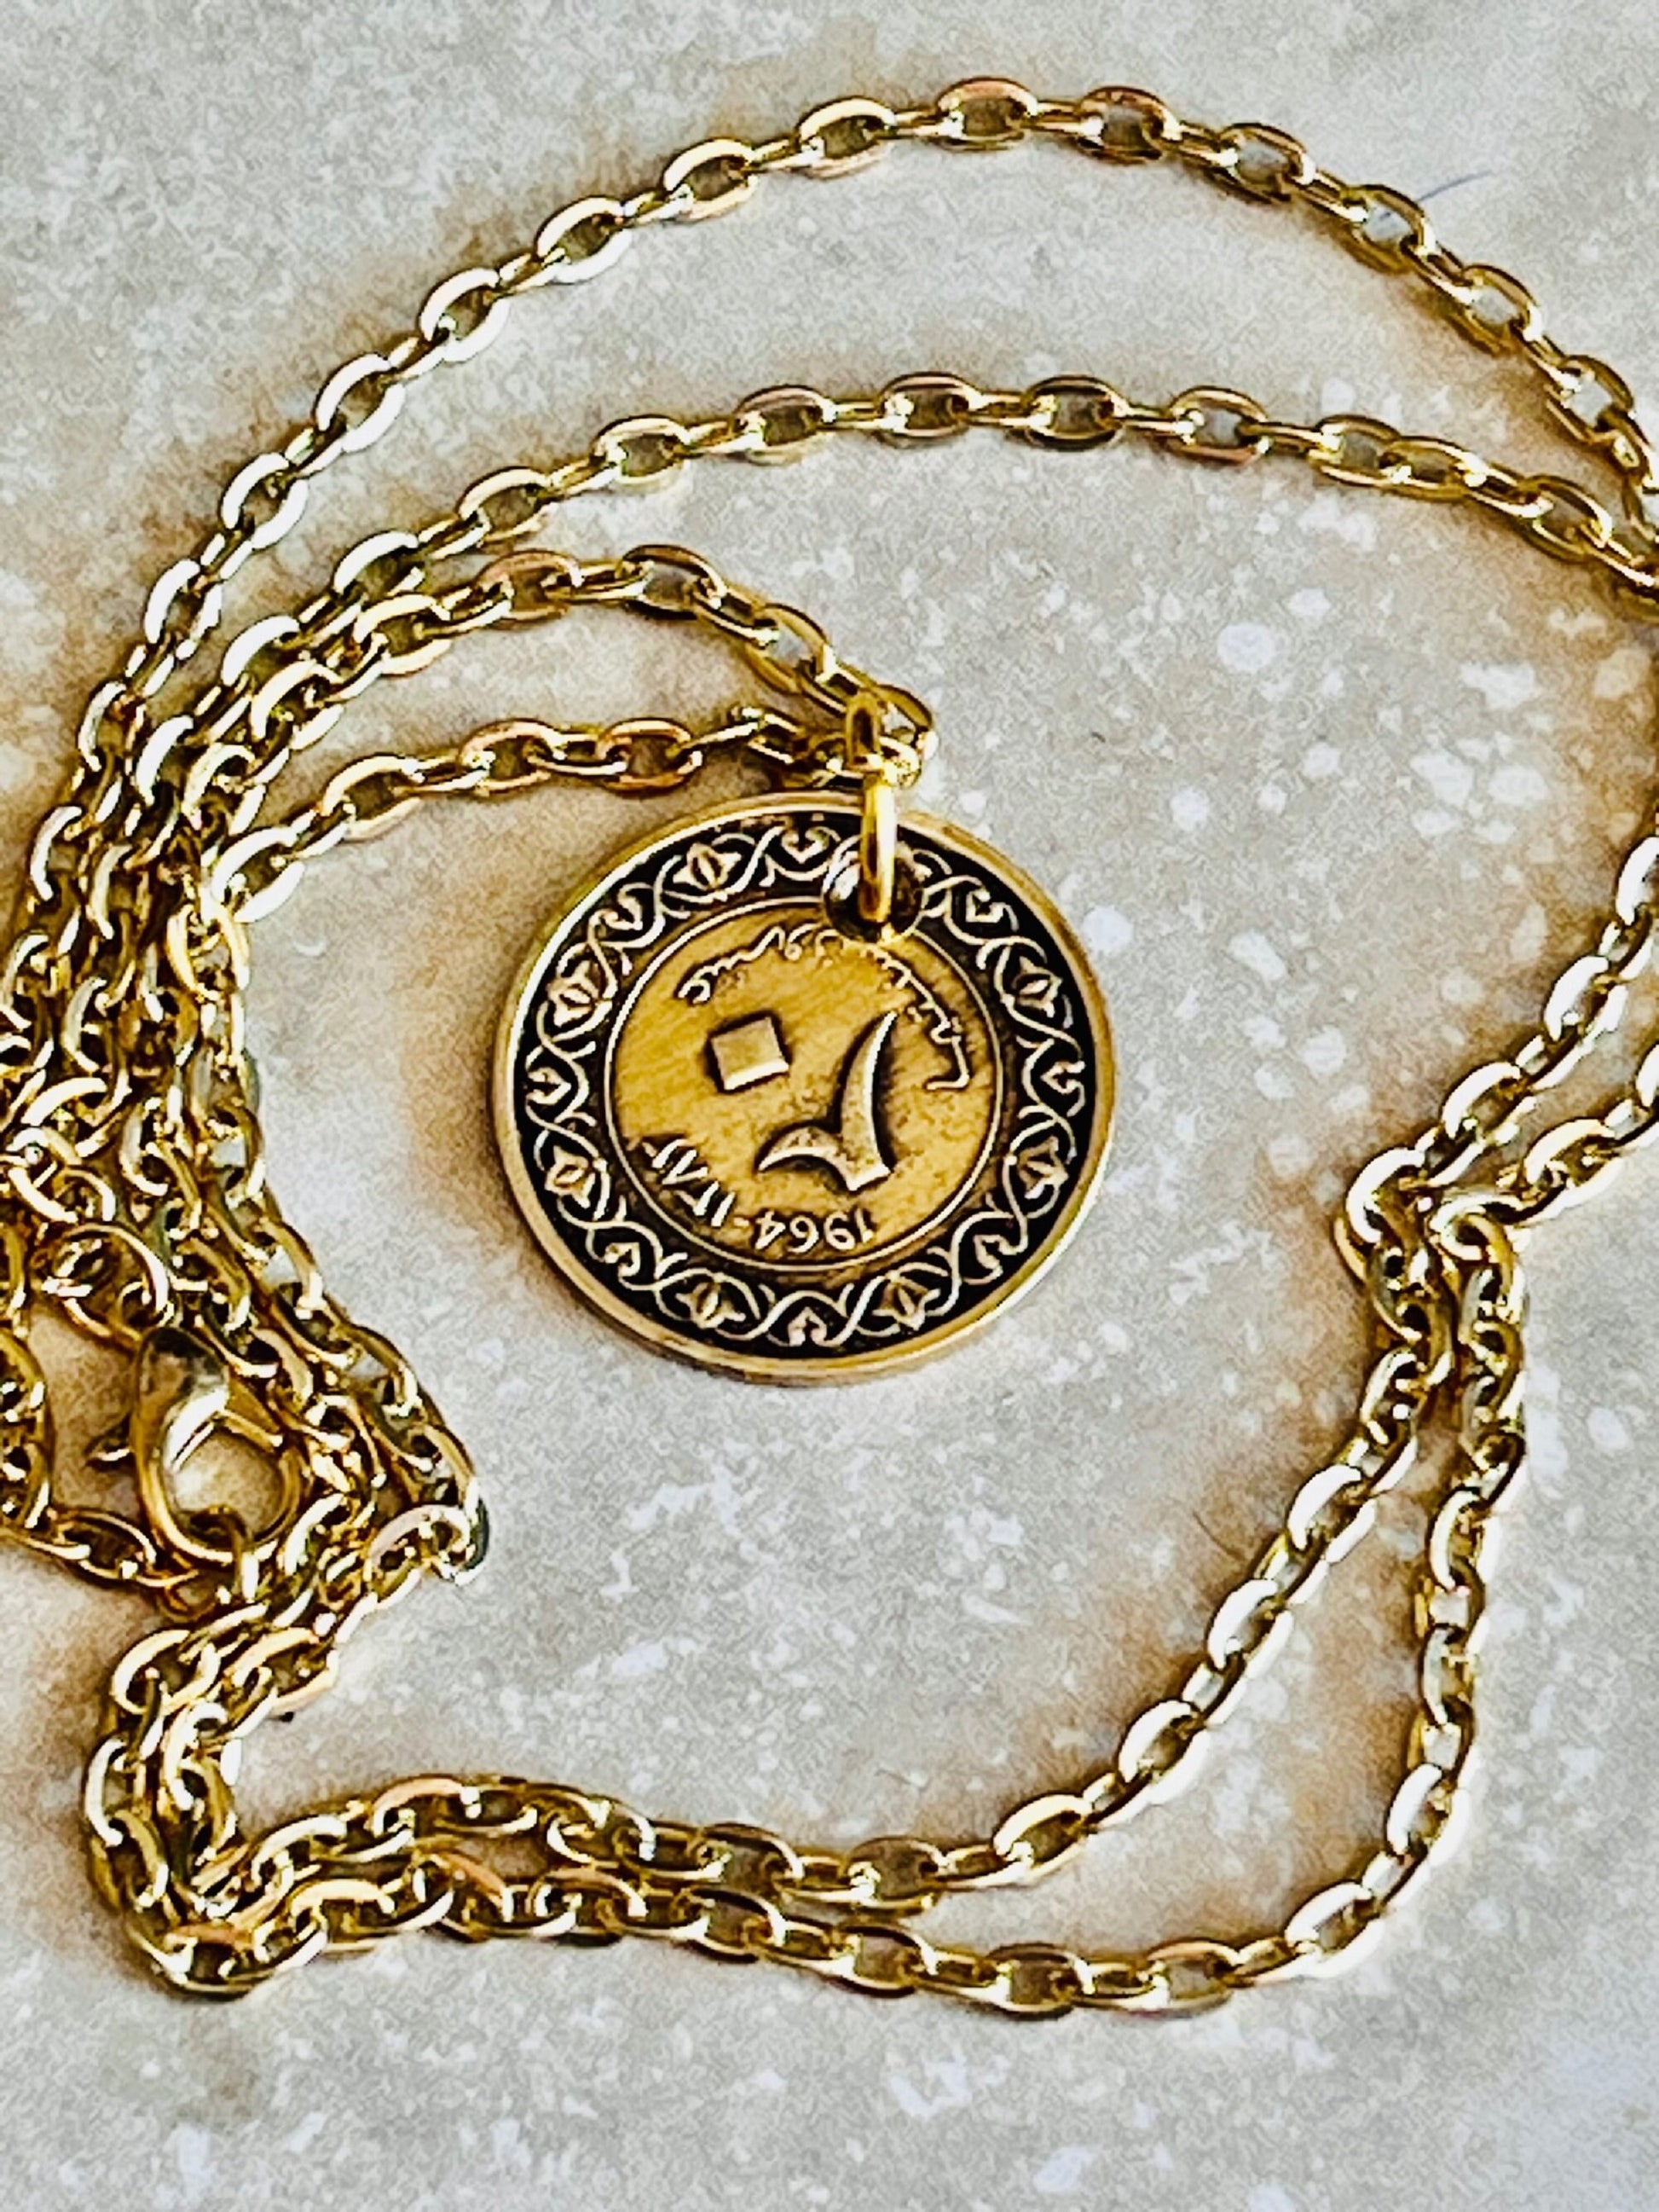 Algeria 20 Centimes Coin Pendant Algerian Personal Necklace Old Vintage Handmade Jewelry Gift Friend Charm For Him Her World Coin Collector